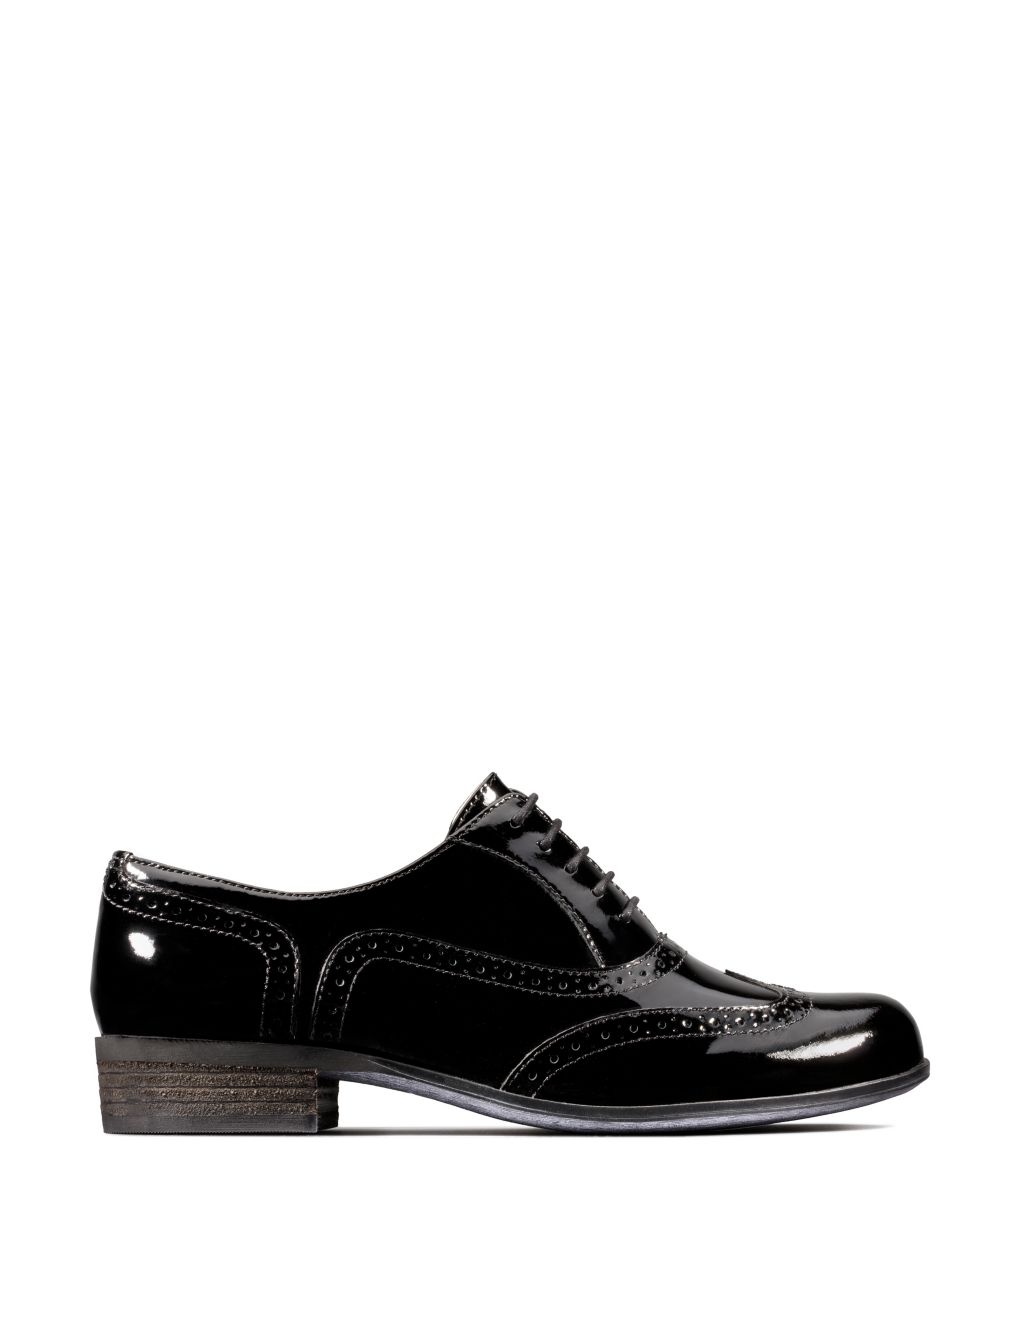 Wide Fit Leather Patent Brogues